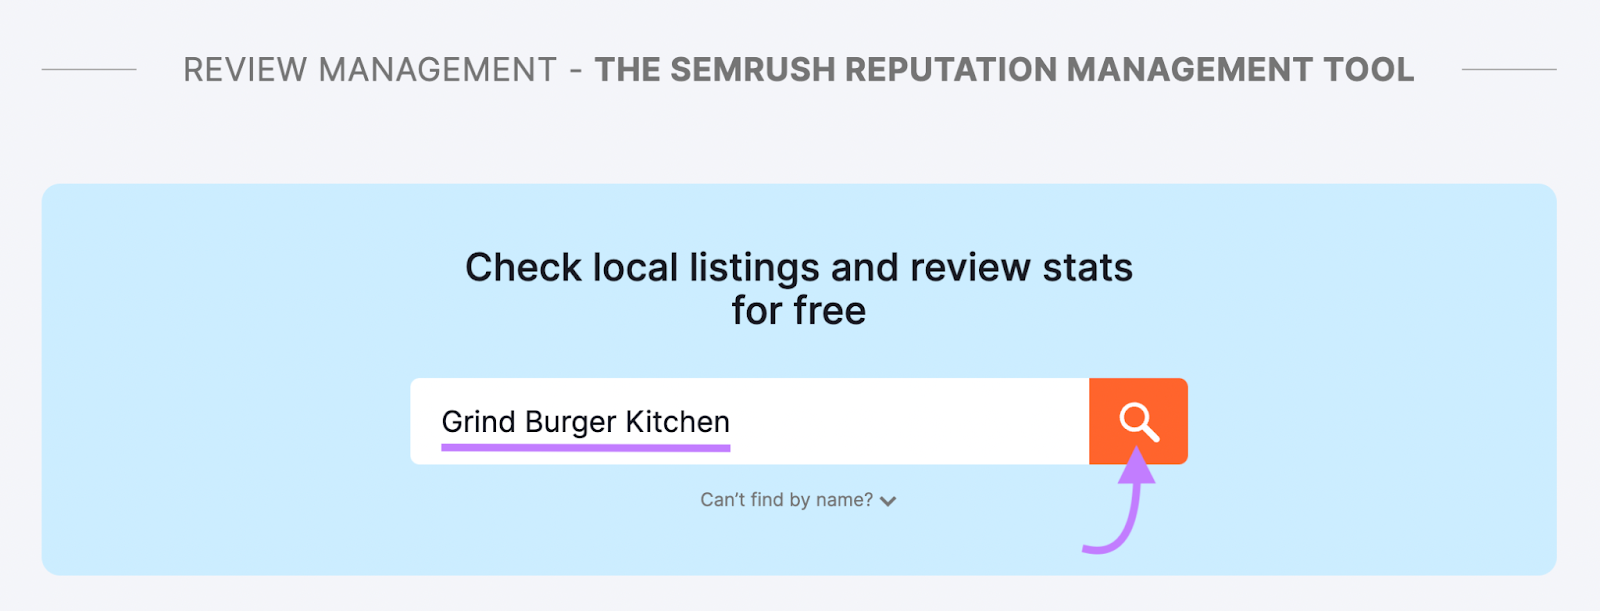 "Grind Burger Kitchen" entered into Review Management tool search bar